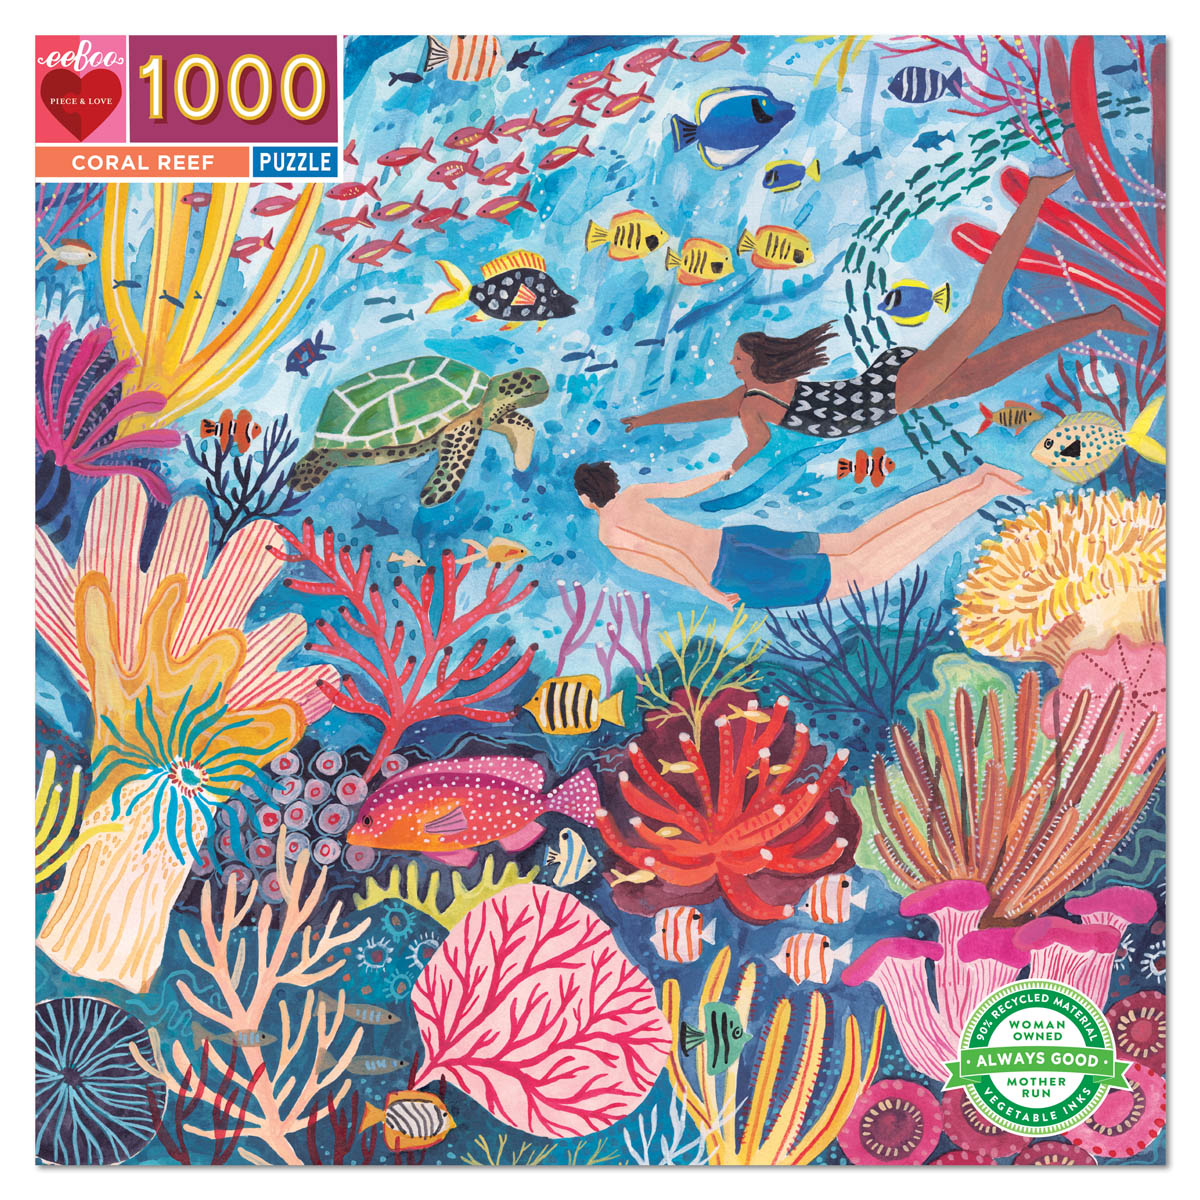 Coral Reef - 1000pc